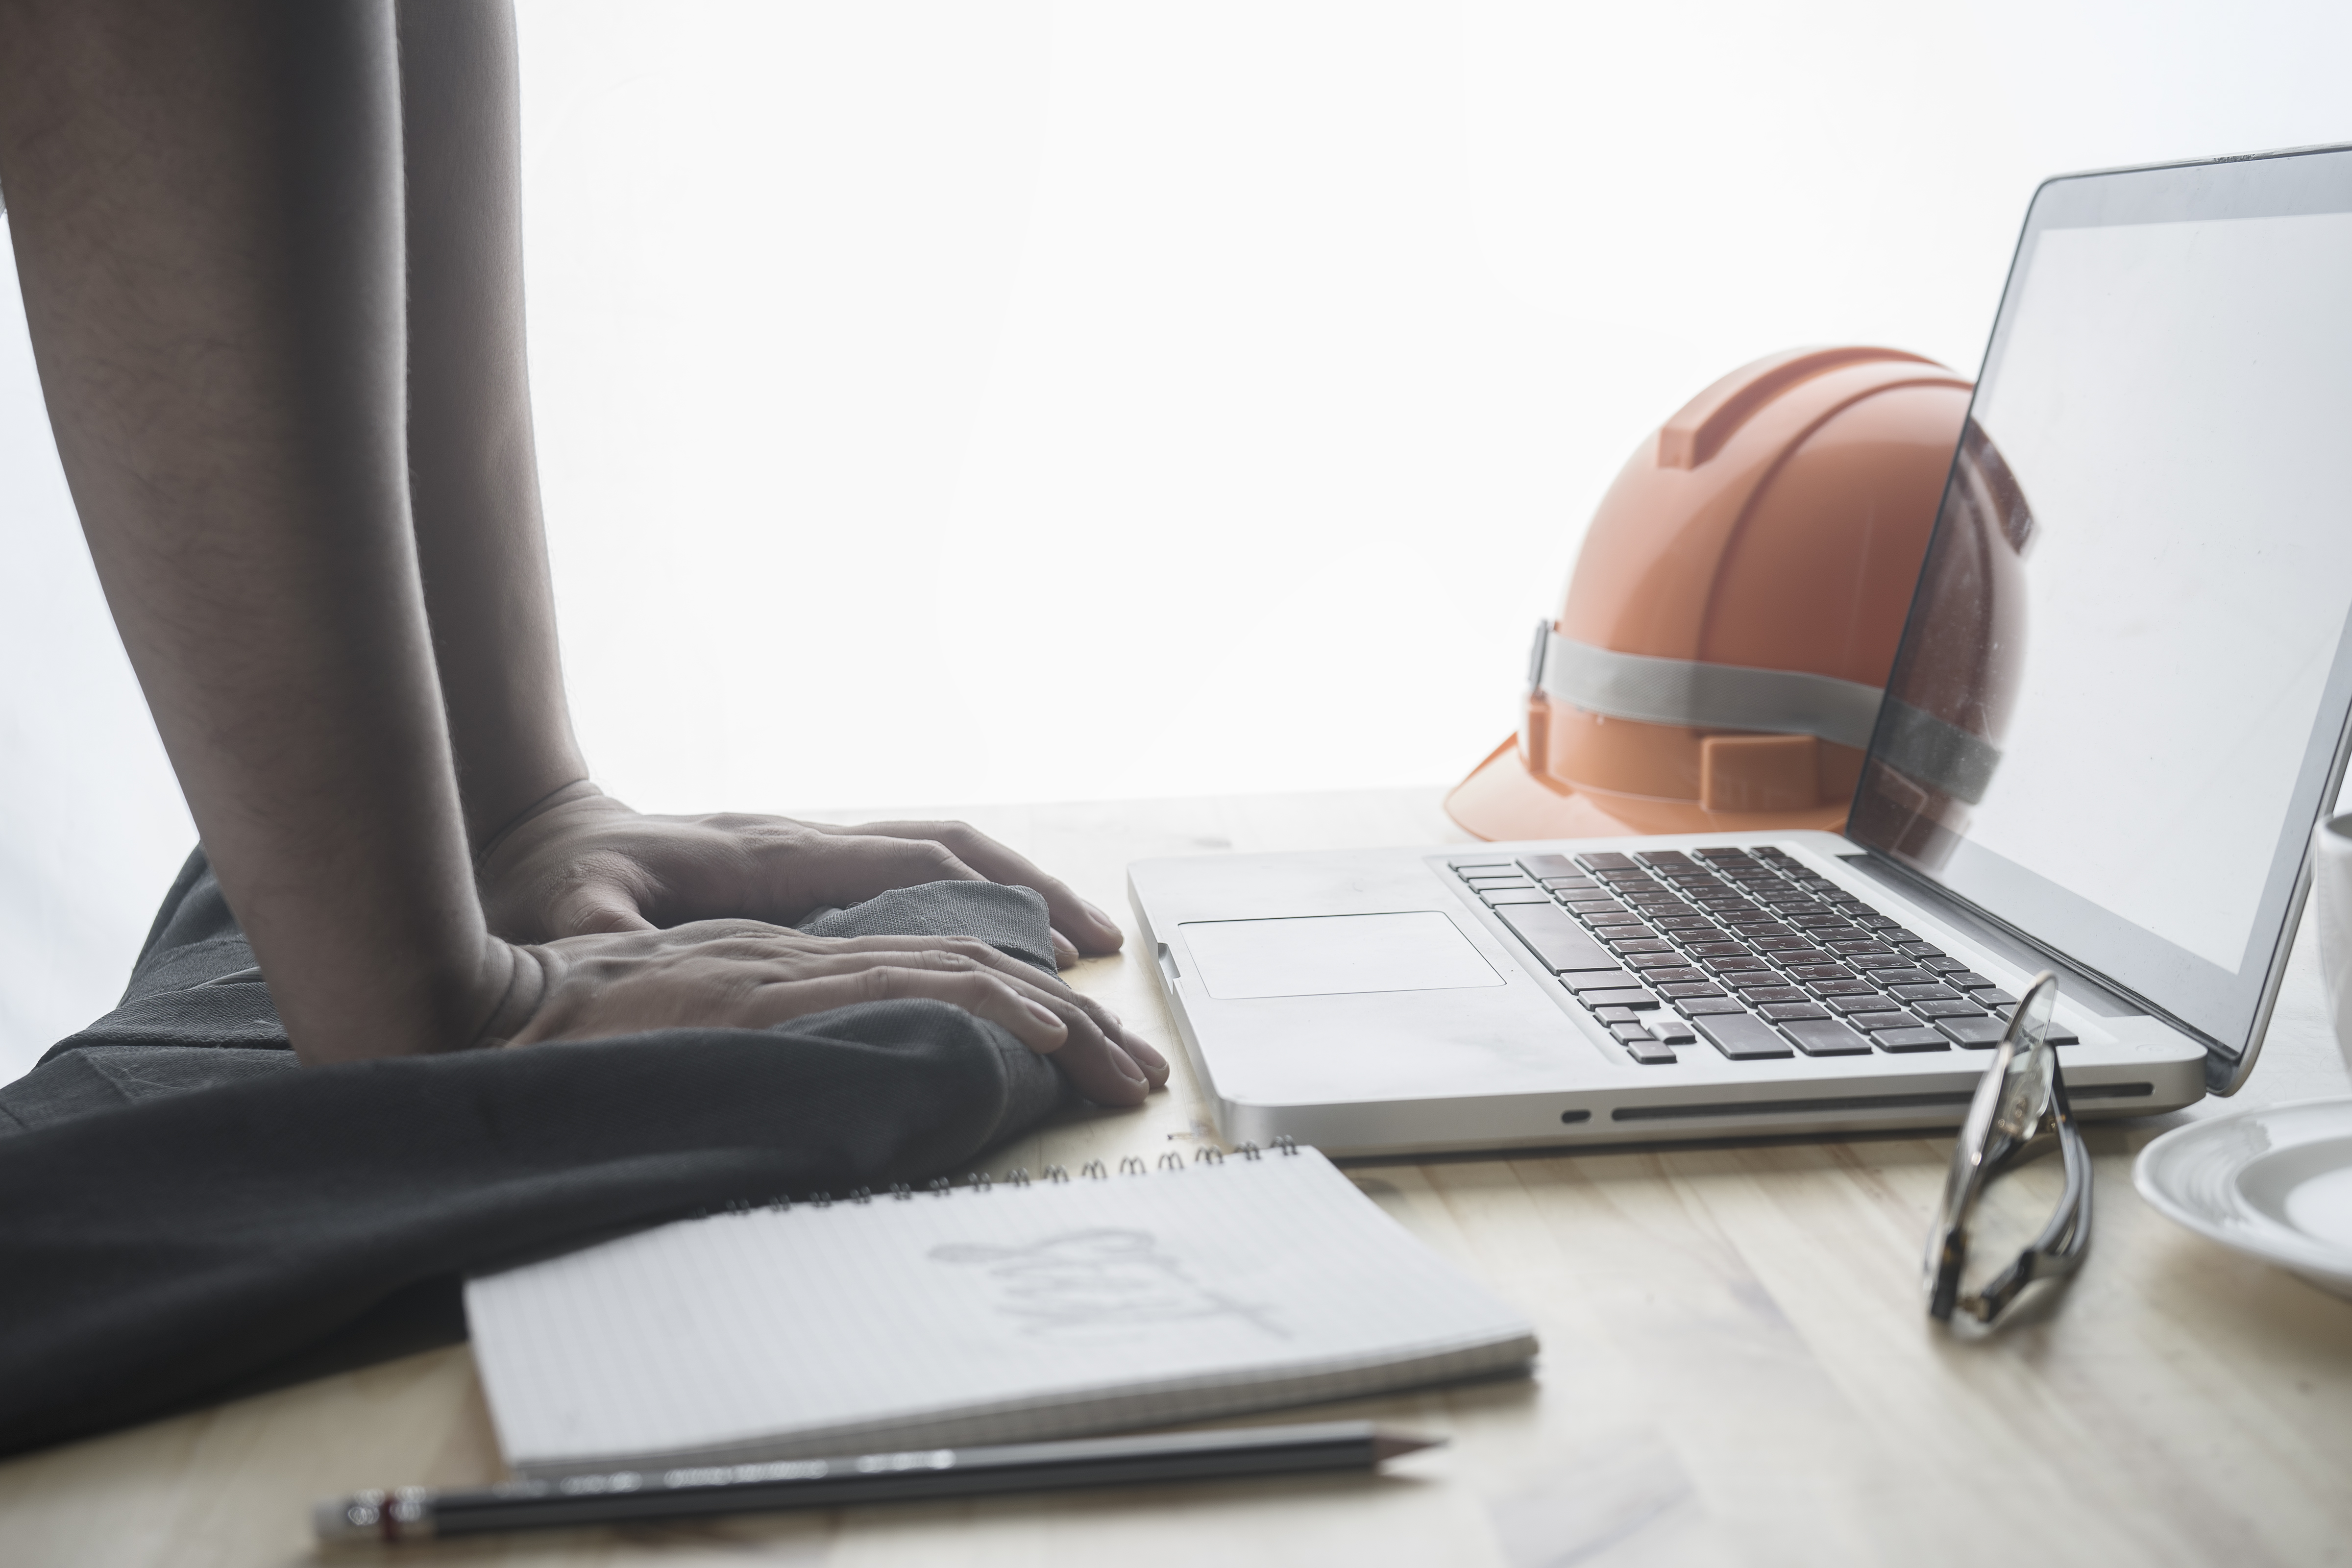 Picture of a hard hat, laptop, and hands on a table